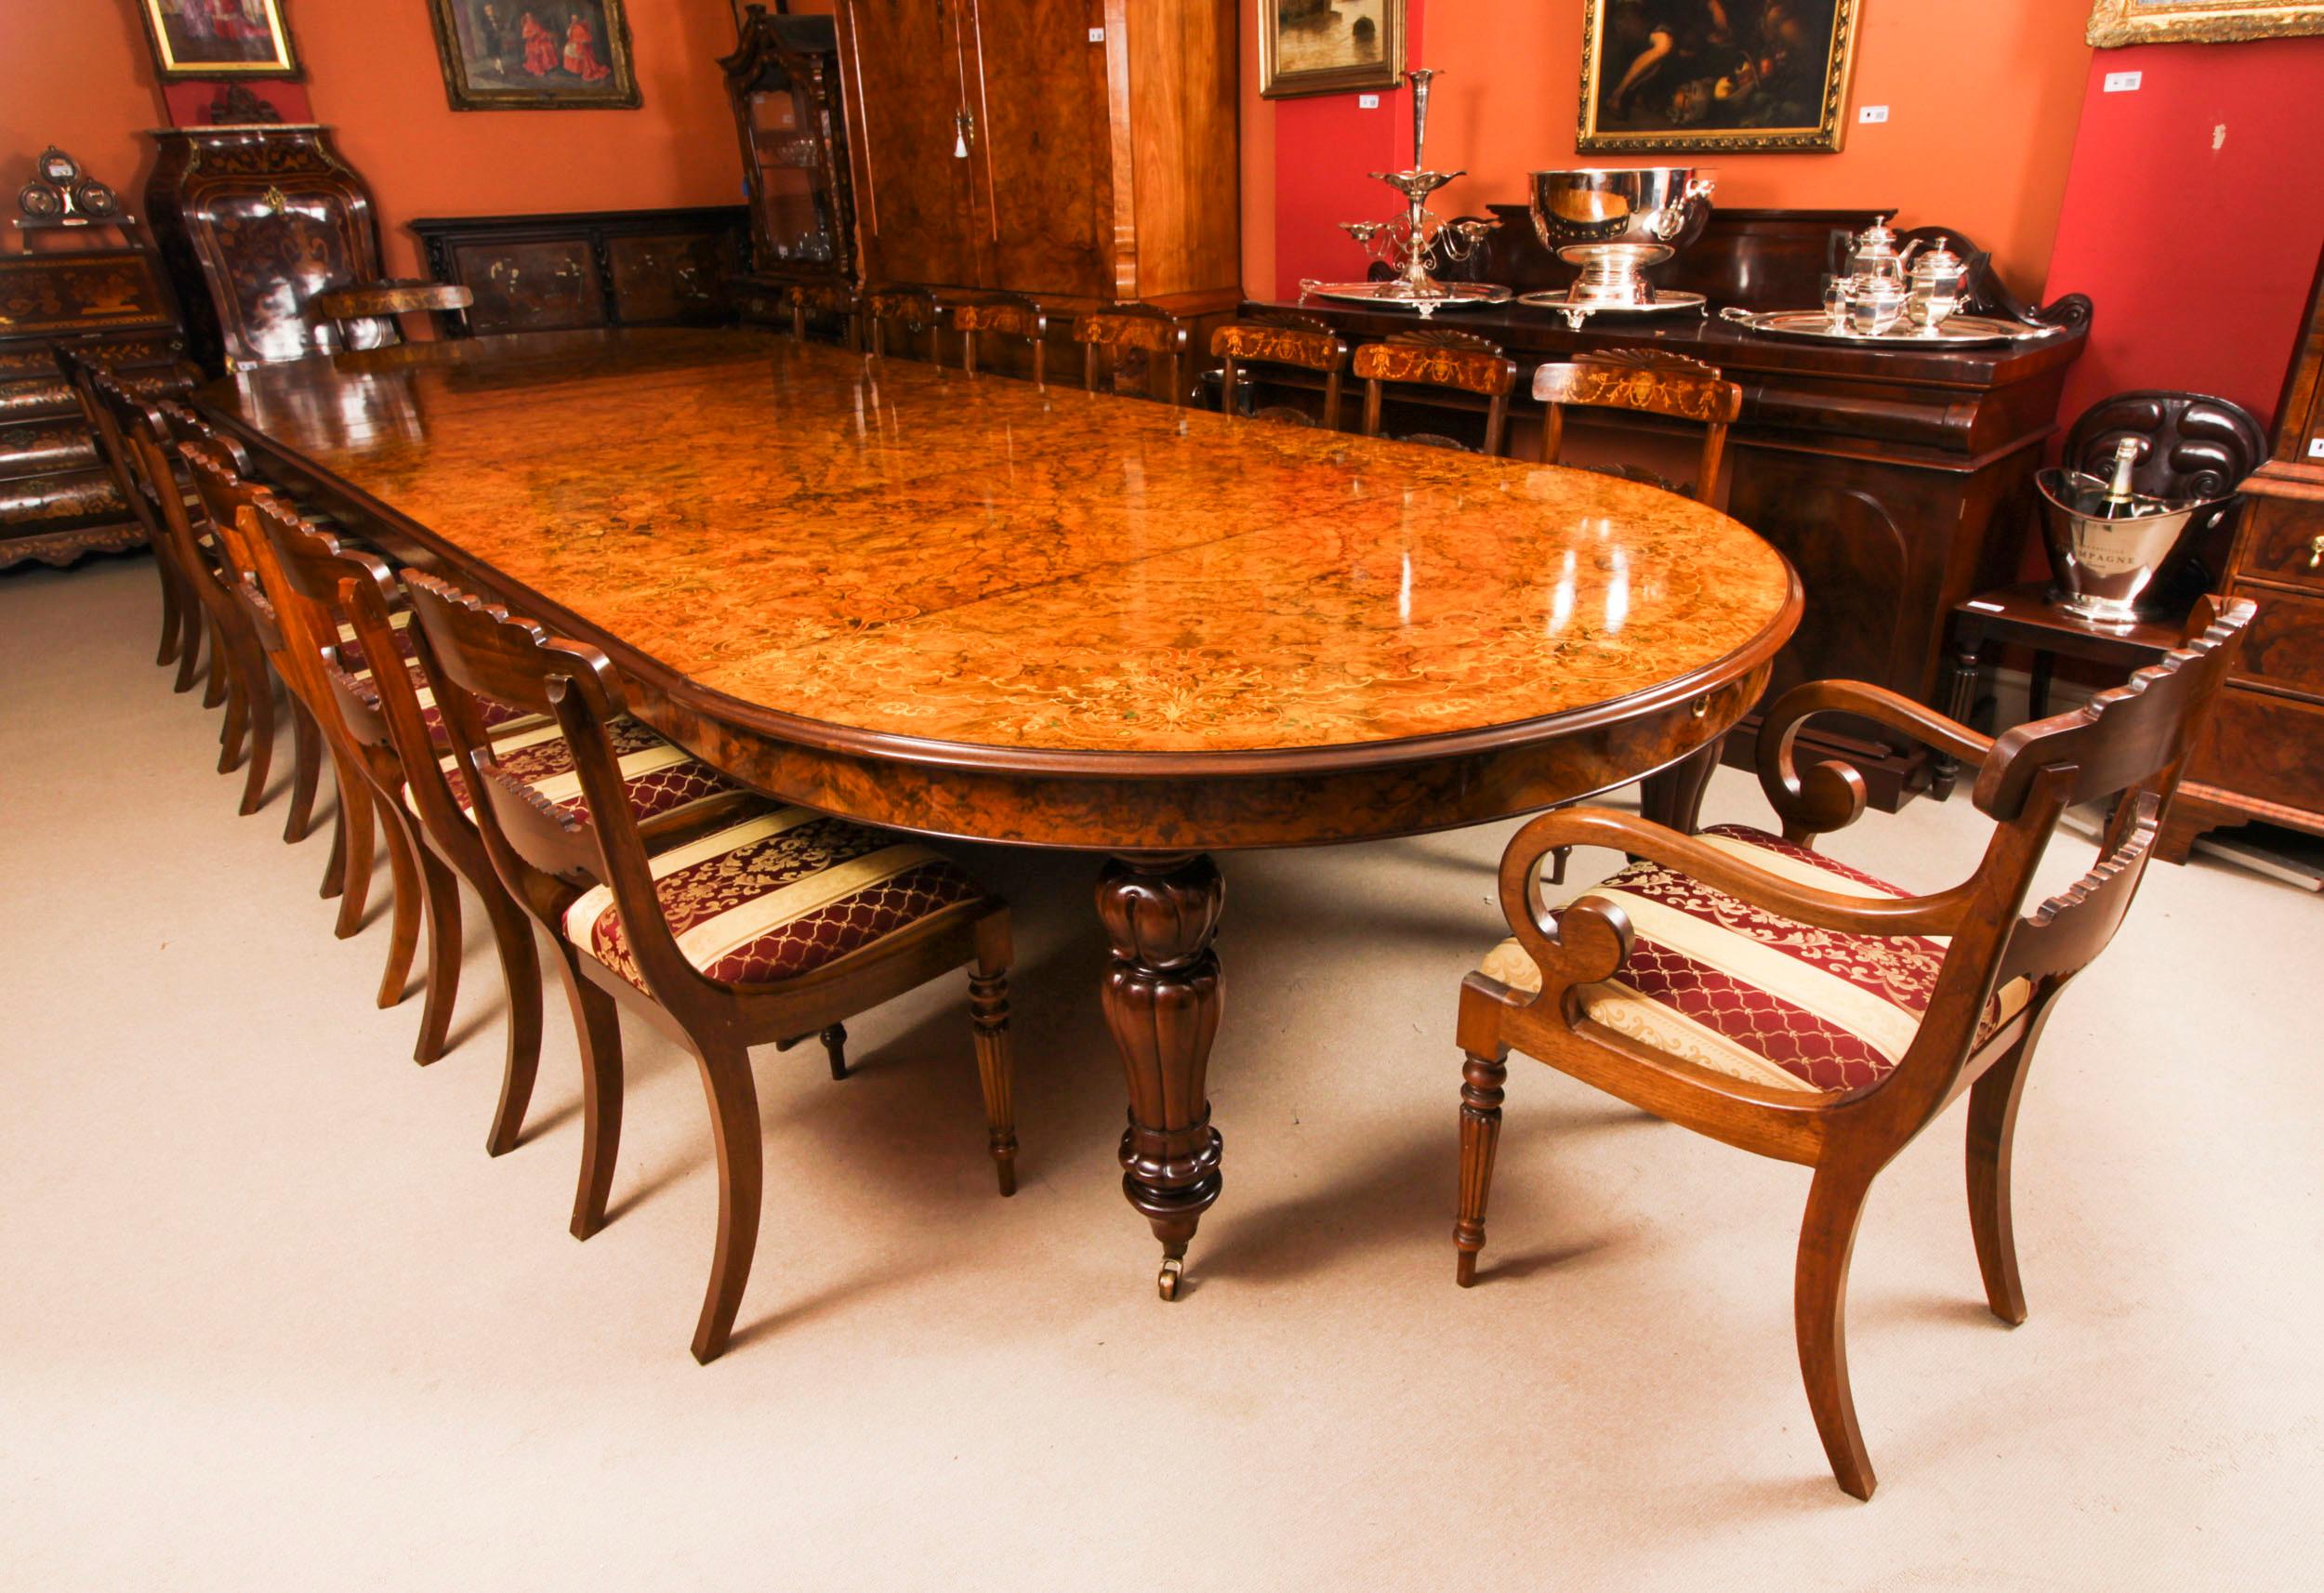 This is a fantastic Vintage Victorian Revival 5 meter burr walnut and marquetry  dining room table, dating from the last quarter of the 20th Century.
The table is made from book matched burr walnut veneers which have a really beautiful colour and